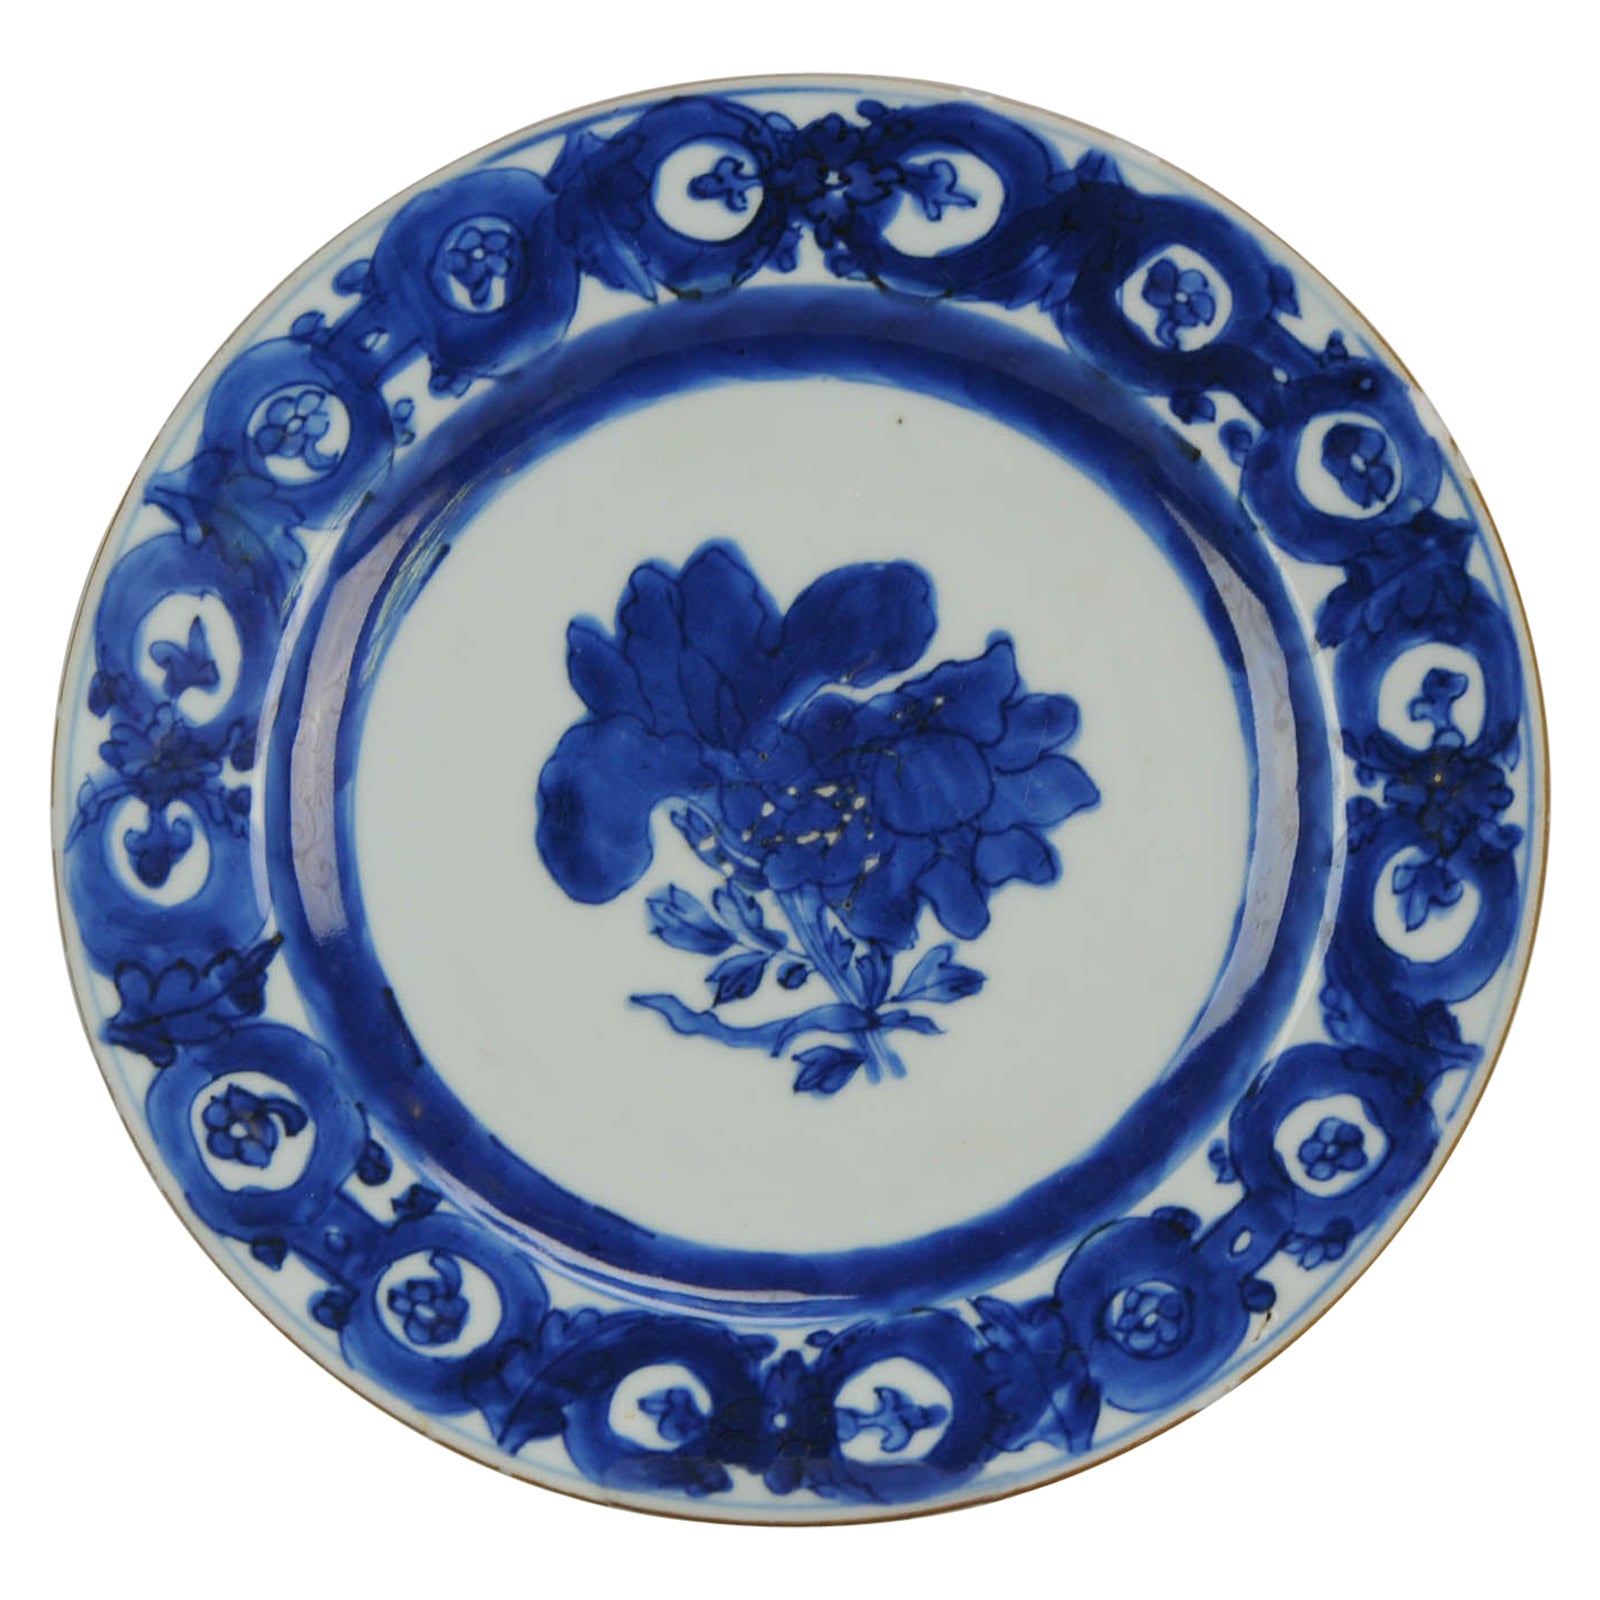 Antique Cobalt Blue Plate Floral Decoration Sybilla Merian Chinese, 18th Century For Sale